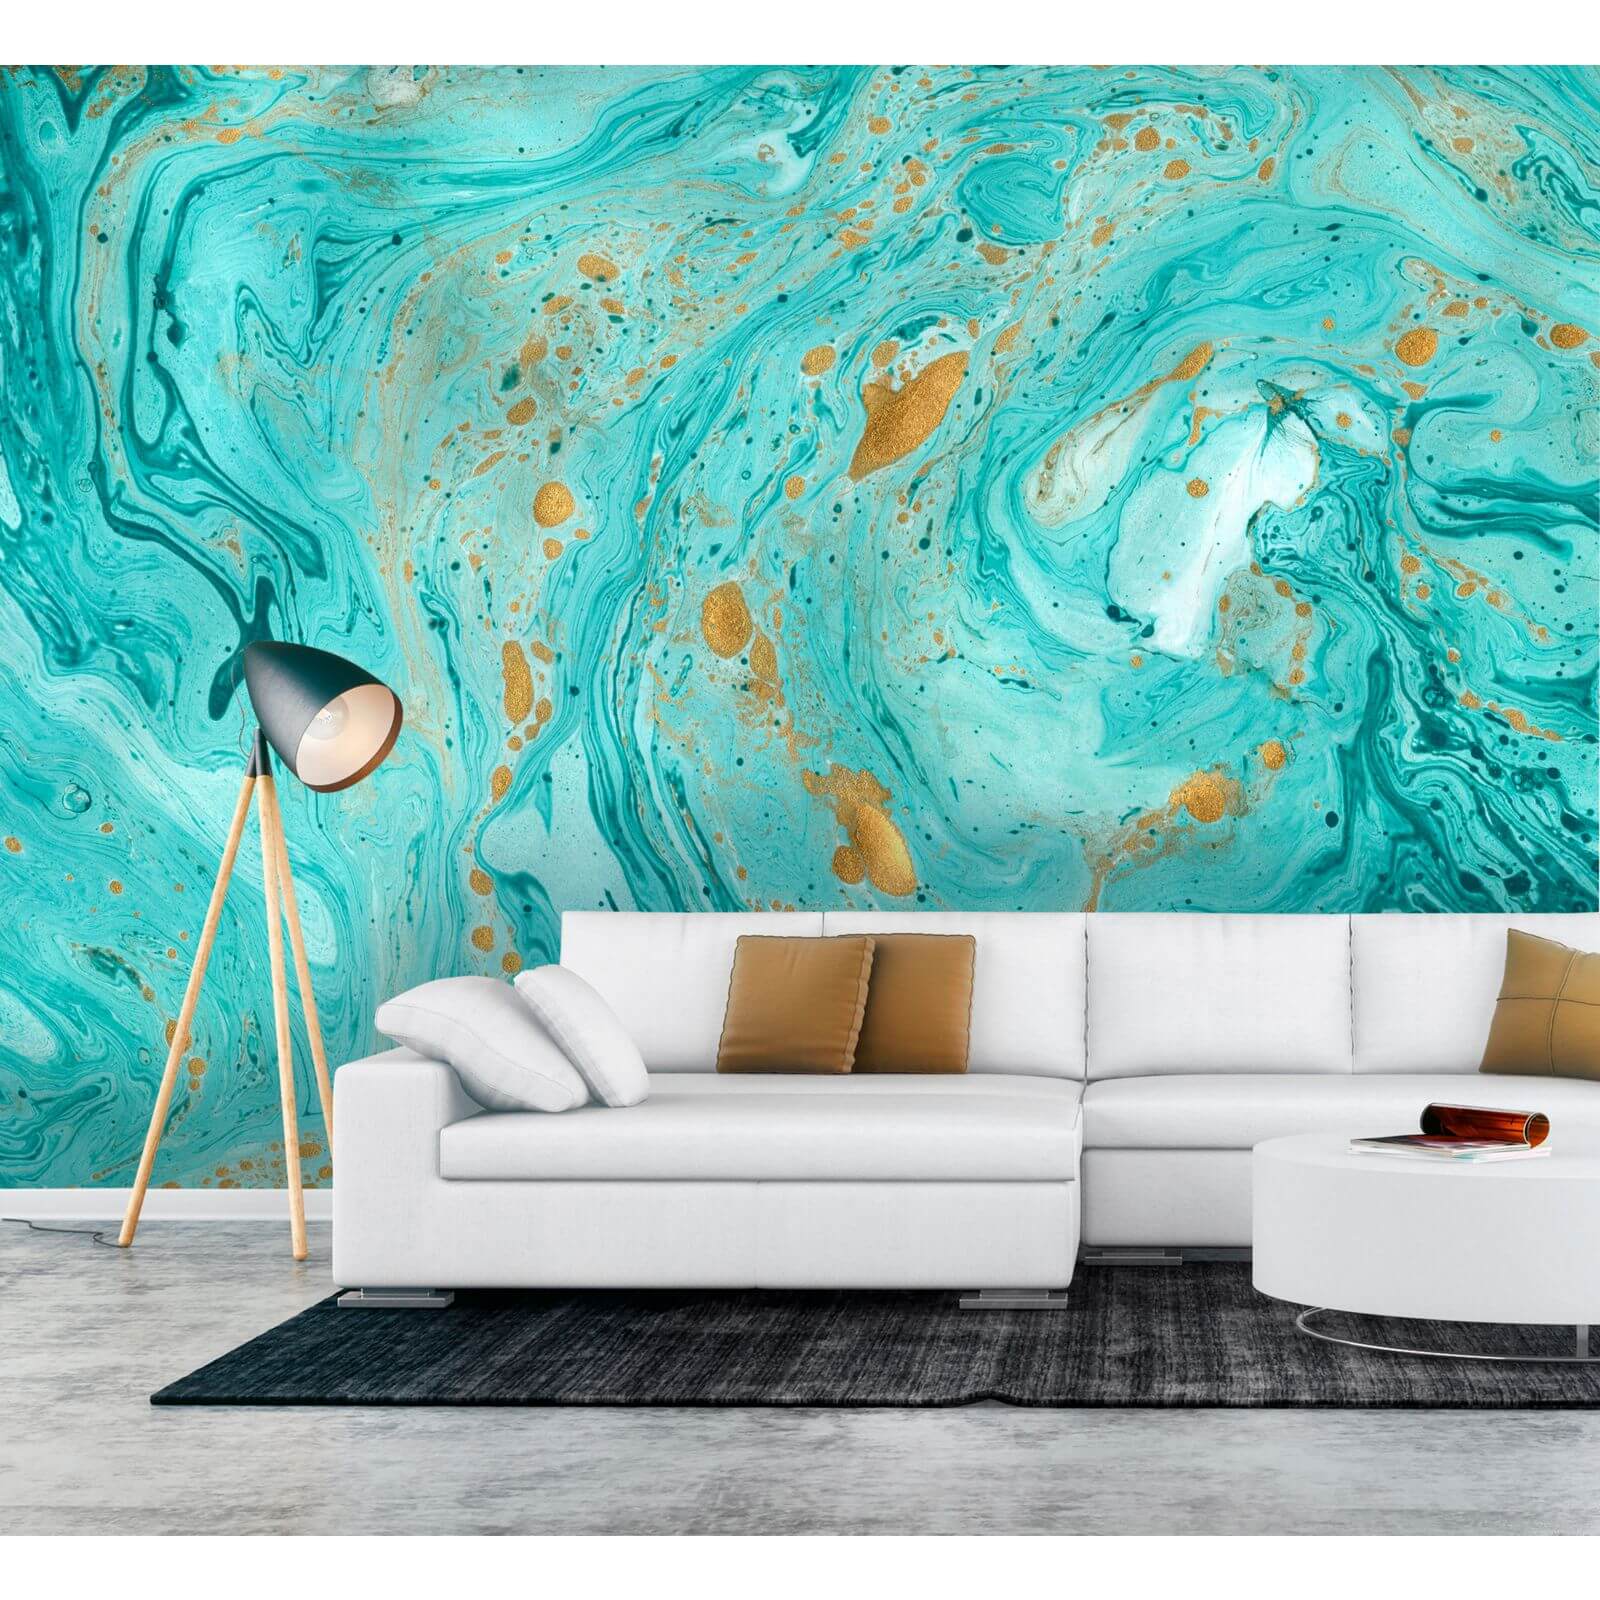 Fine Decor Abstract Marble Icy Blue and Gold Smooth Wallpaper Mural